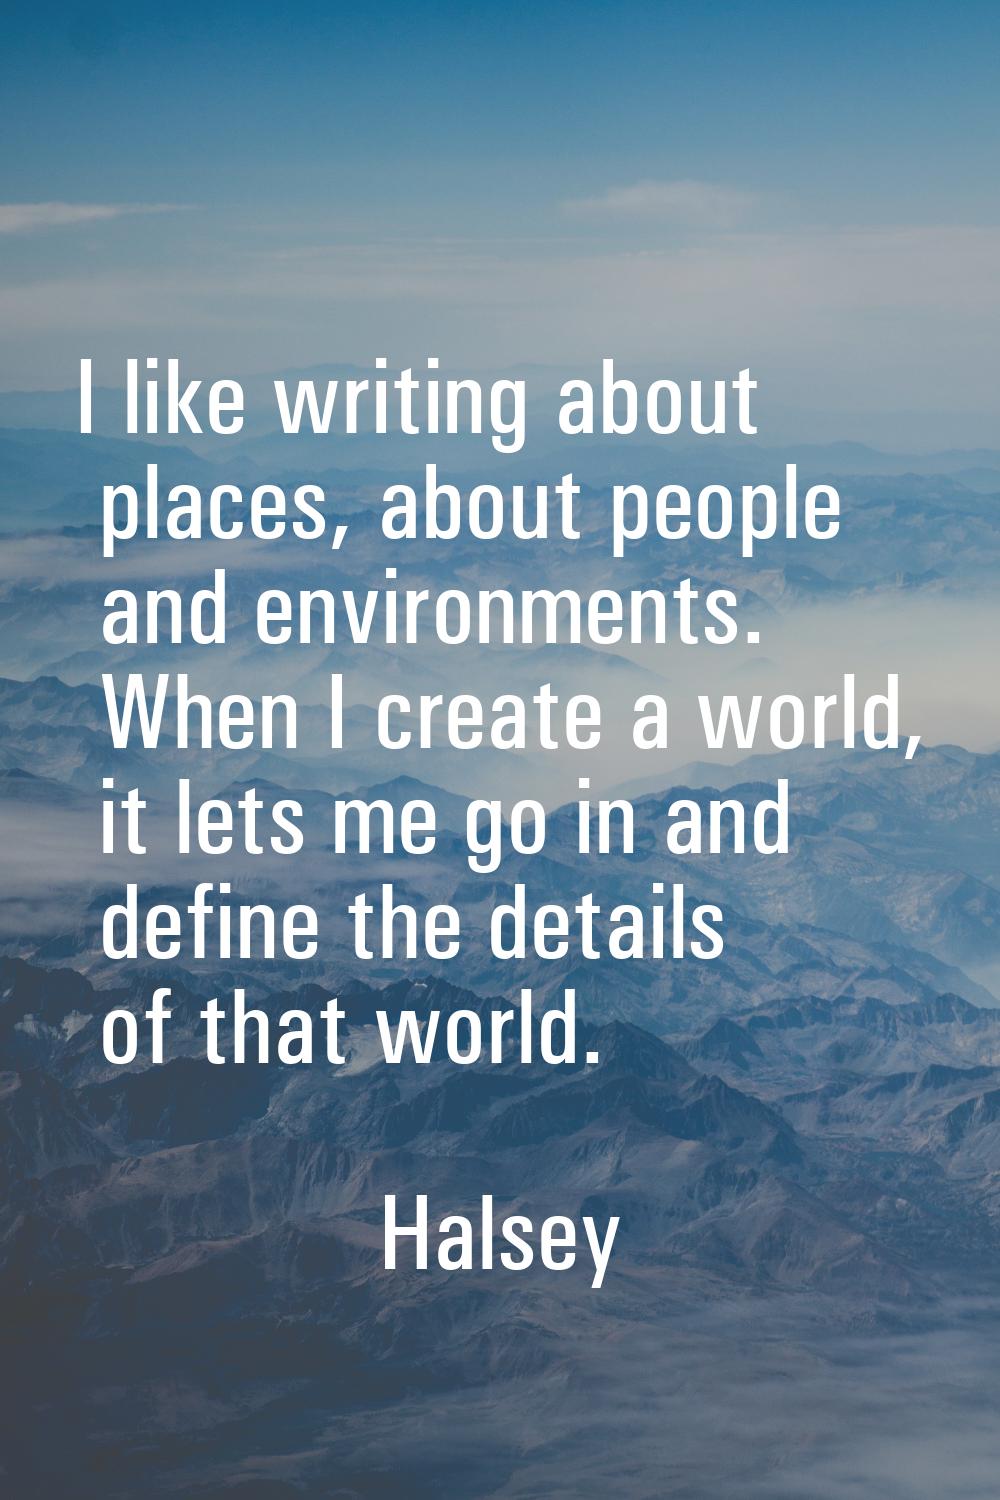 I like writing about places, about people and environments. When I create a world, it lets me go in